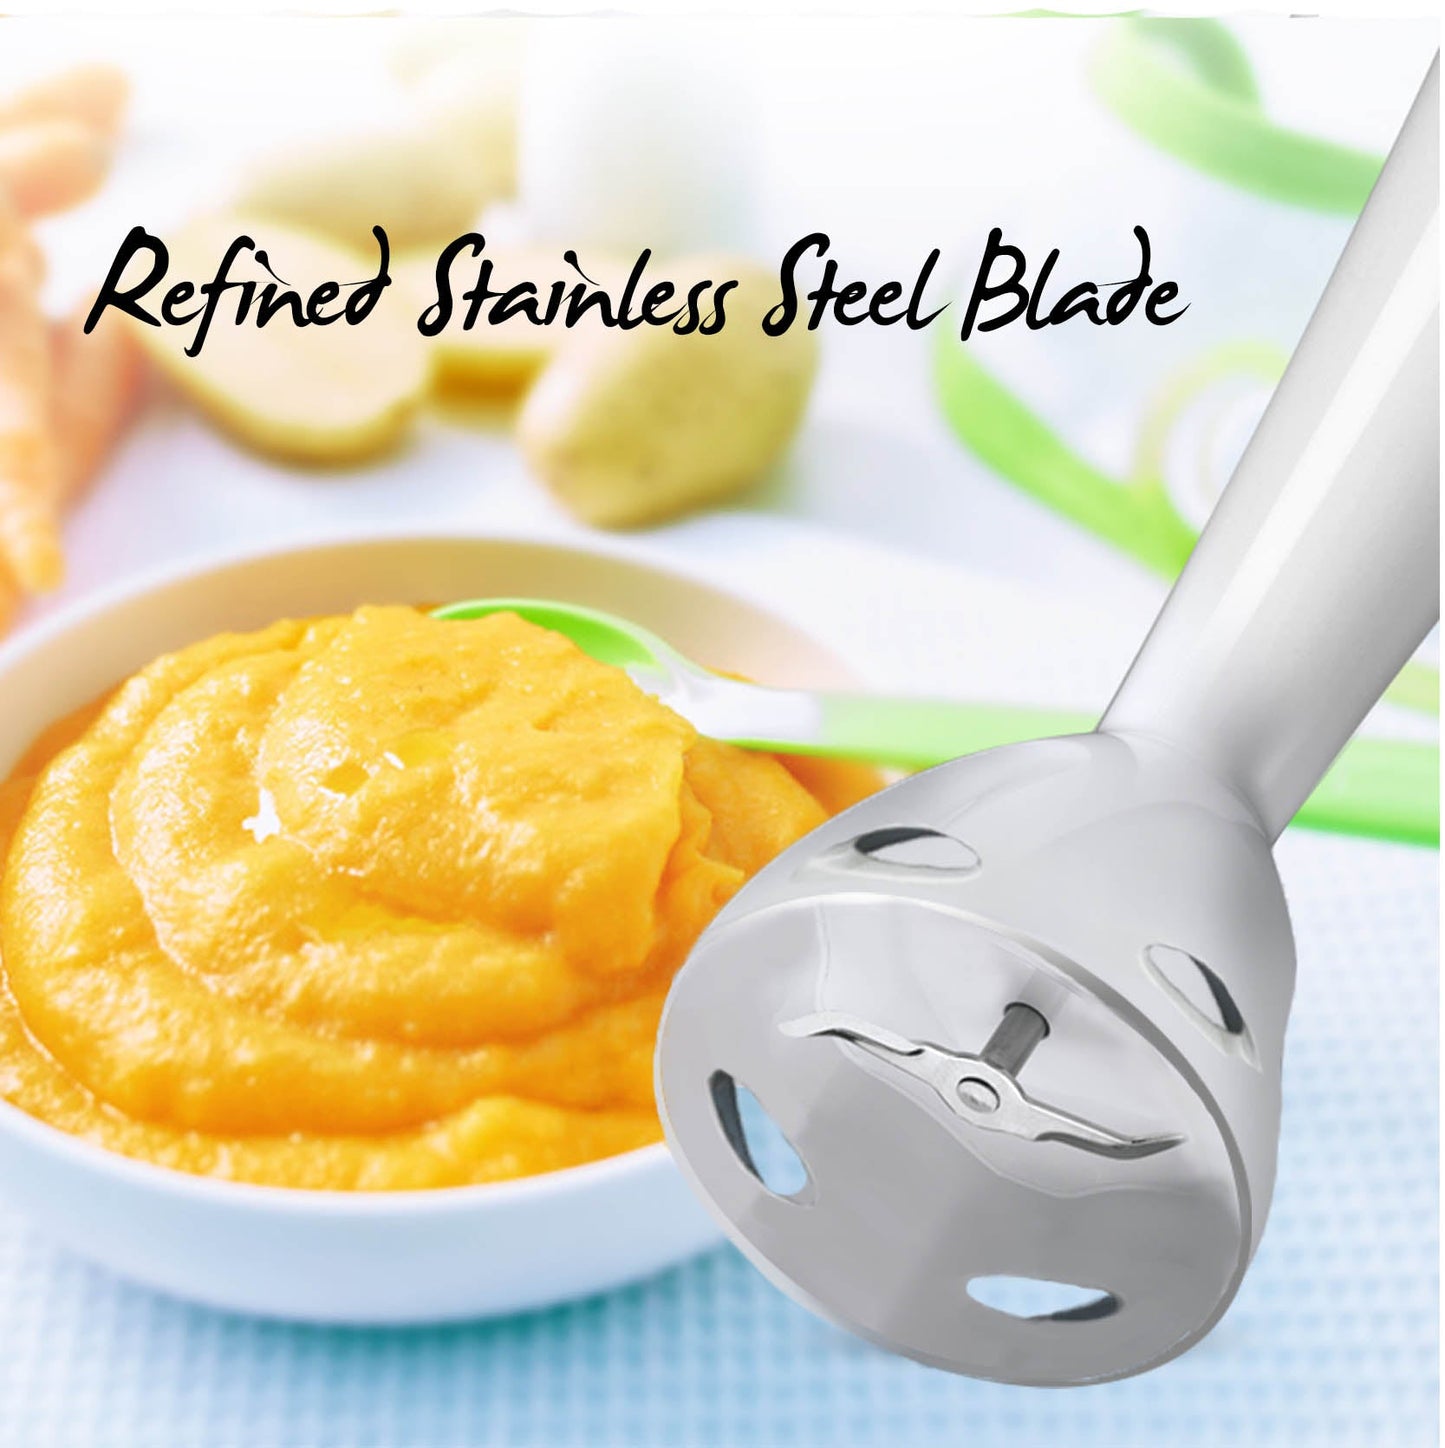 POWERPAC Hand Mixer with Stainless Steel Blade